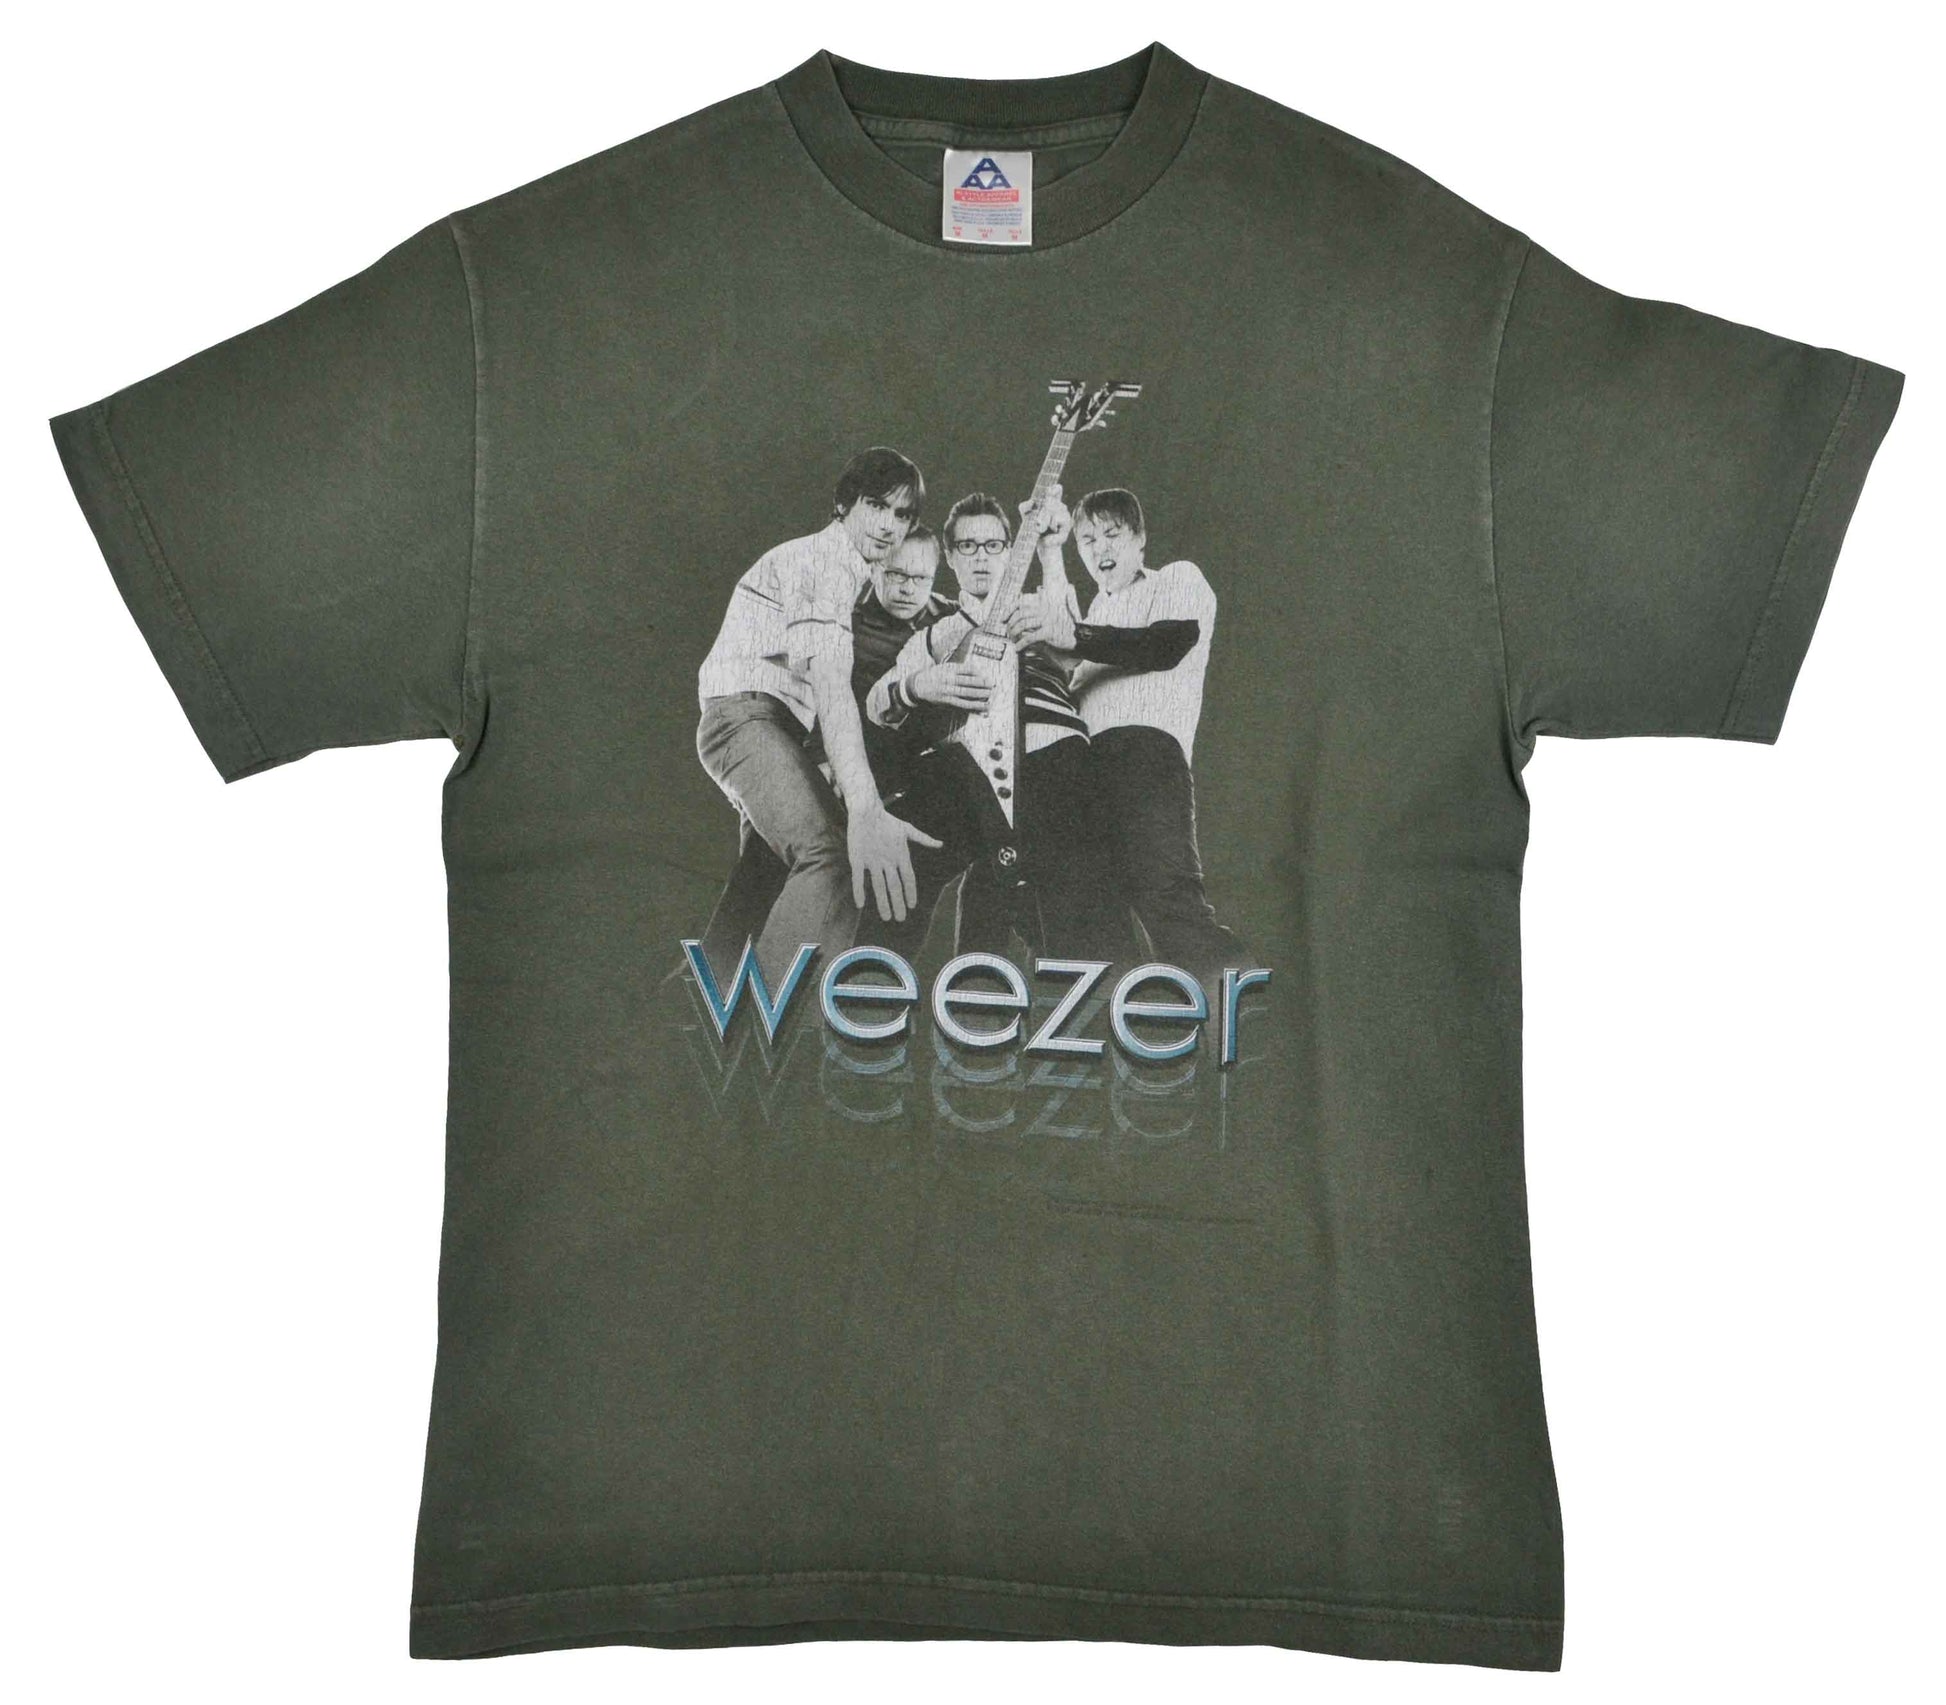 Vintage Band T-Shirt 2002 Weezer "Hyper-Extended Midget" Tour   The Hyper-Extended Midget Tour supported the third studio album from the band, Green Album. With a more pop sound,  the album was a commercial success and received mostly positive reviews by the fans. It debuted at number four in the United States and the song Hash Pipe was a worldwide hit, charting on seven different charts. The tee has a really good vintage look.